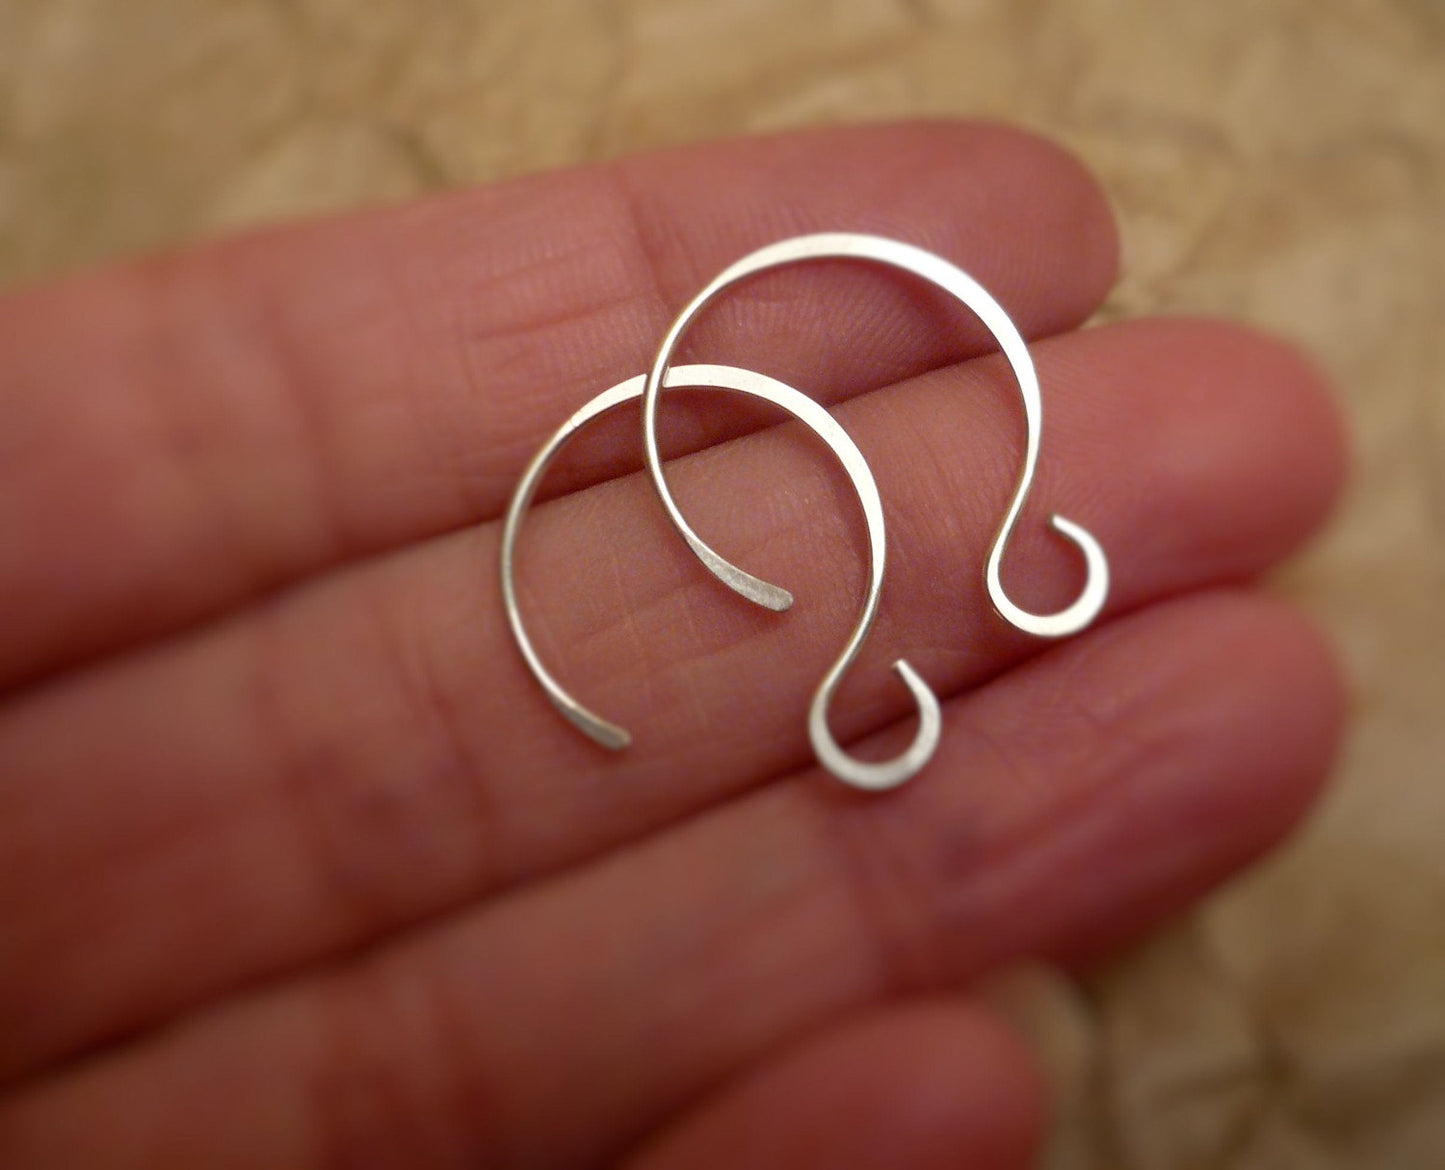 Large Solitude Sterling Silver Earwires - Handmade. Handforged. Heavily Oxidized